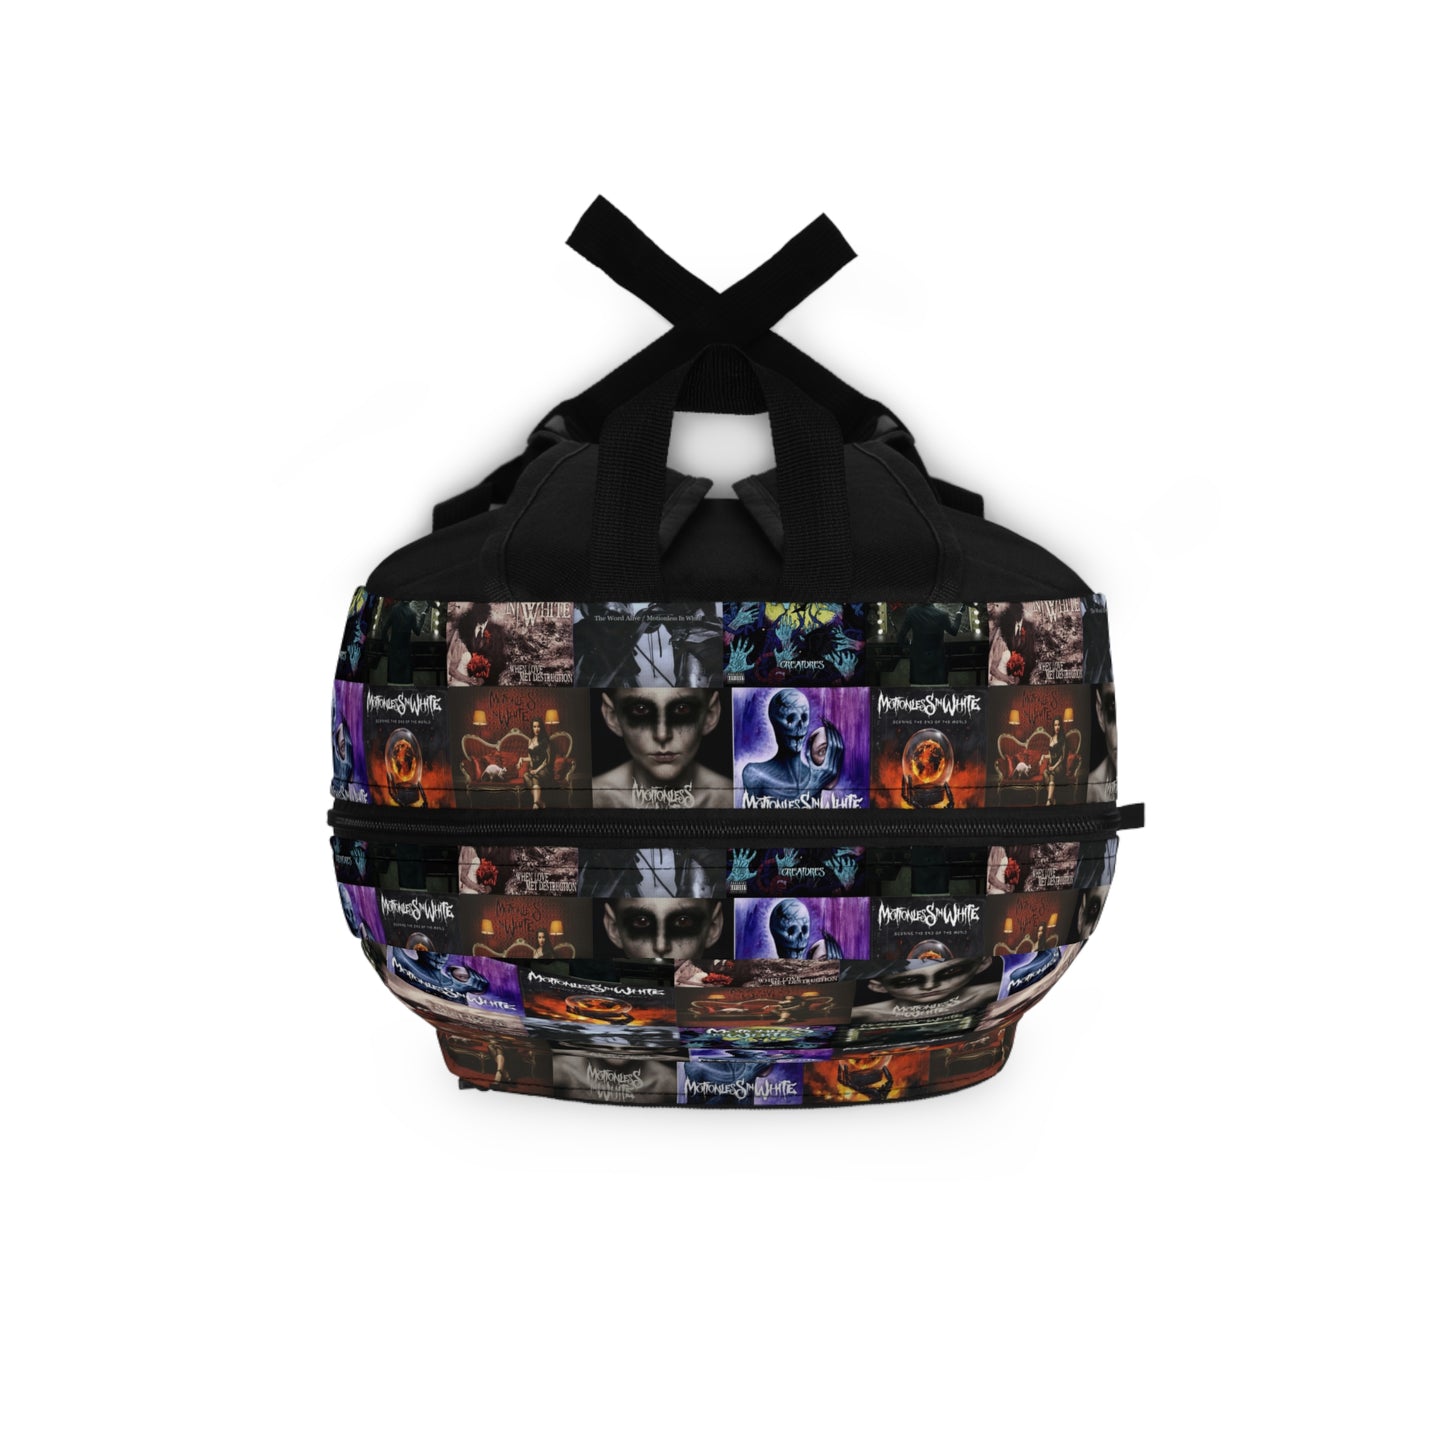 Motionless In White Album Cover Collage Backpack